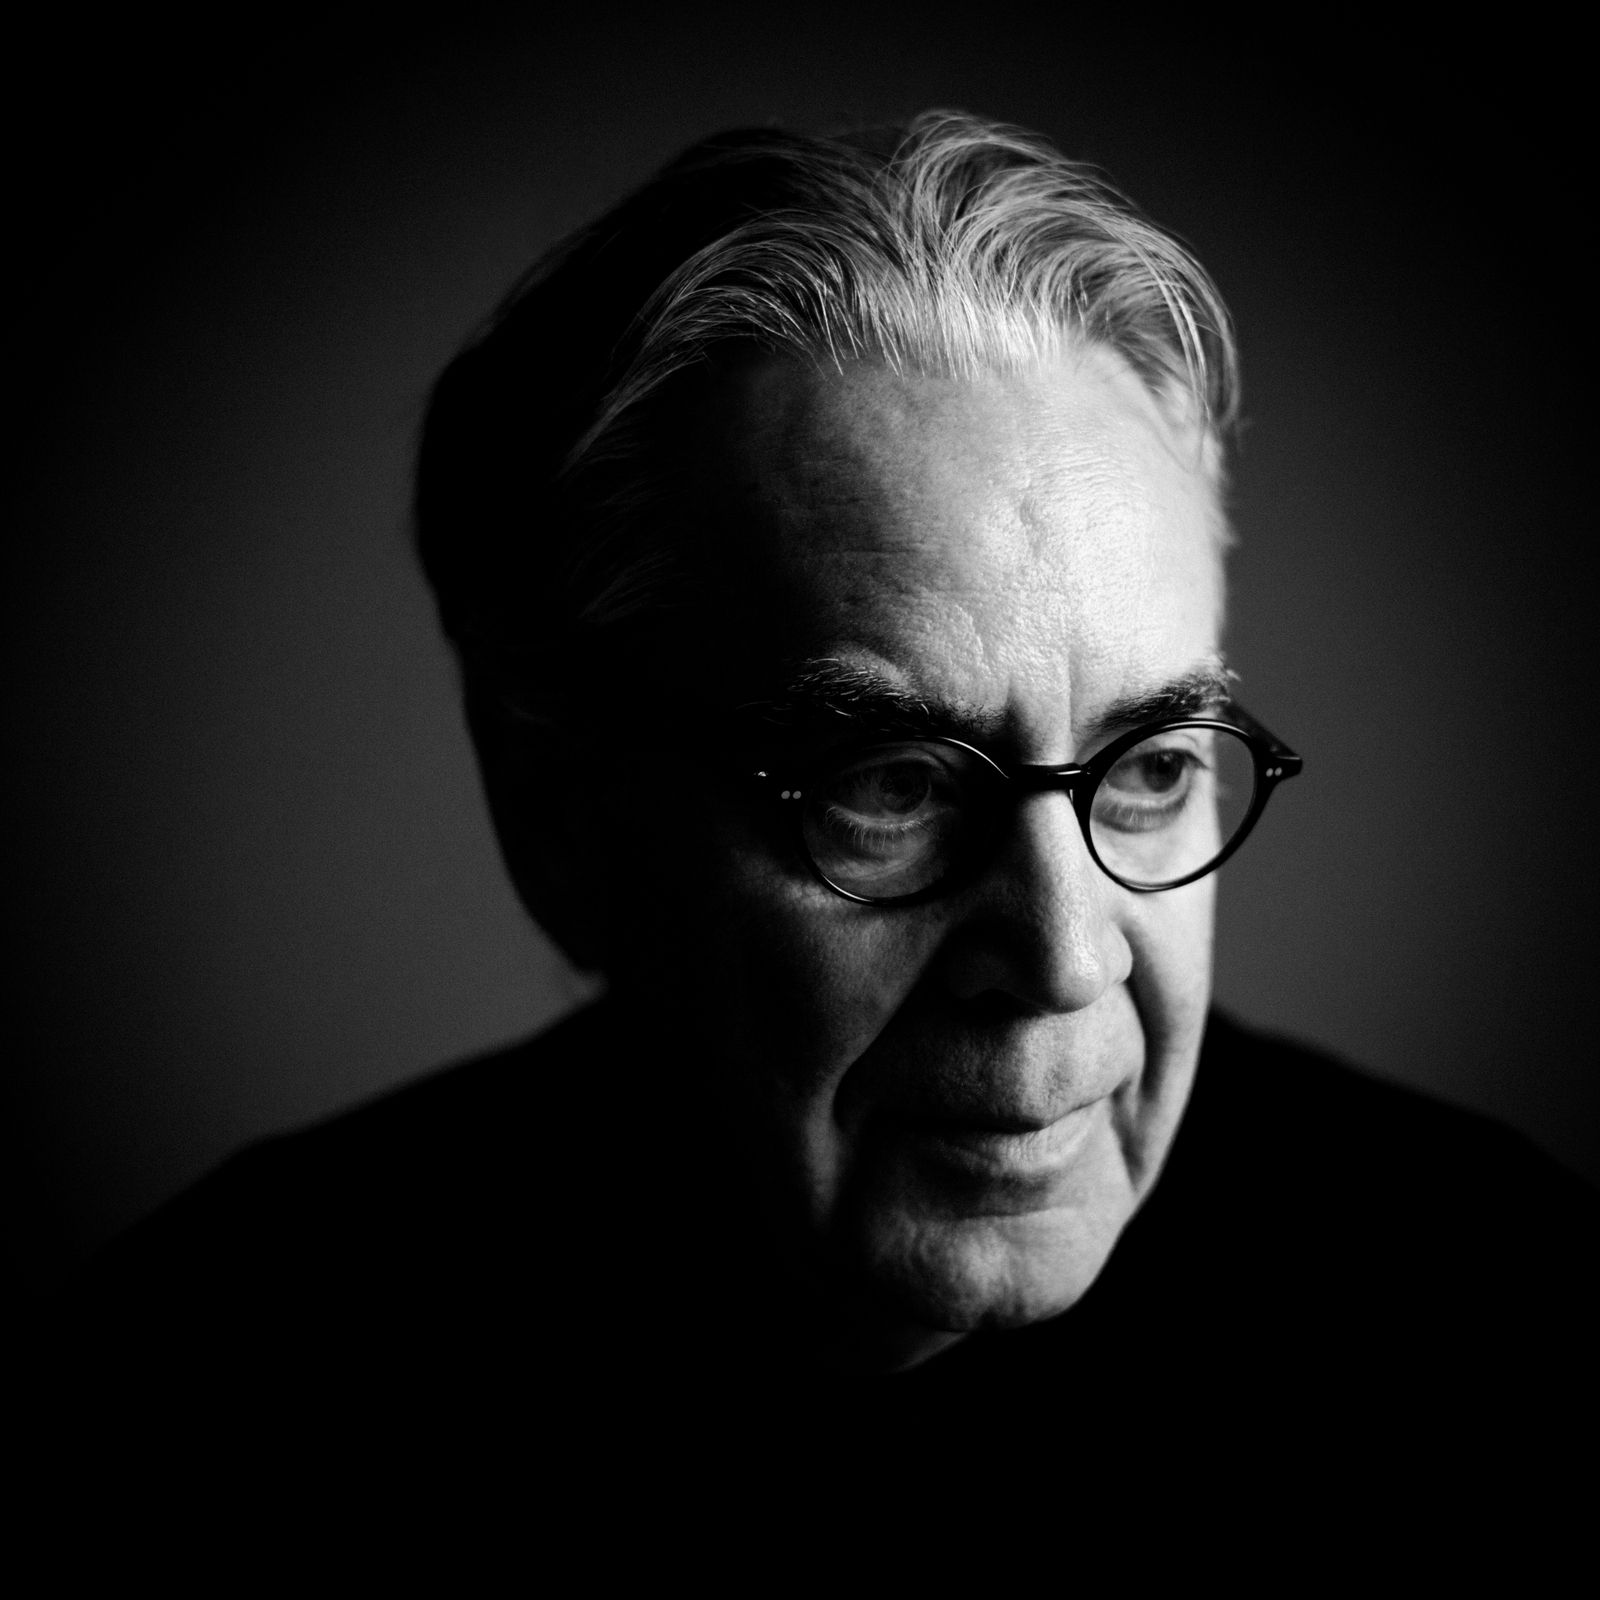 Episode 323: Composer Howard Shore Discusses His Career